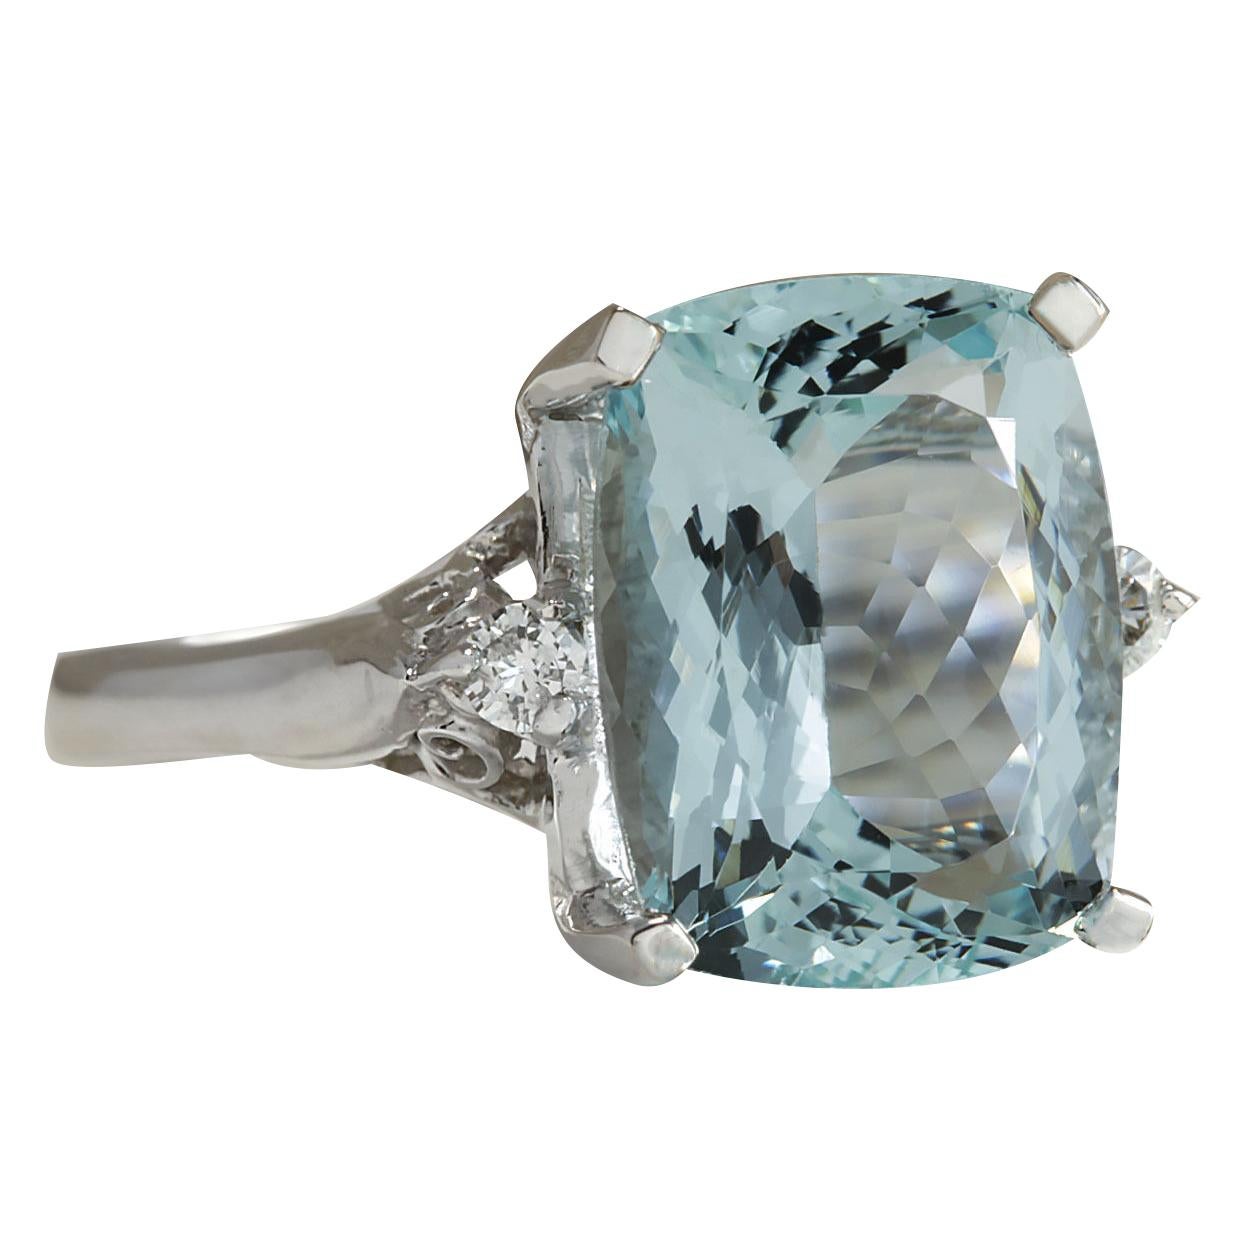 Stamped: 14K White Gold
Total Ring Weight: 4.0 Grams
Total Natural Aquamarine Weight is 4.50 Carat (Measures: 12.00x10.00 mm)
Color: Blue
Total Natural Diamond Weight is 0.10 Carat
Color: F-G, Clarity: VS2-SI1
Face Measures: 12.27x14.45 mm
Sku: